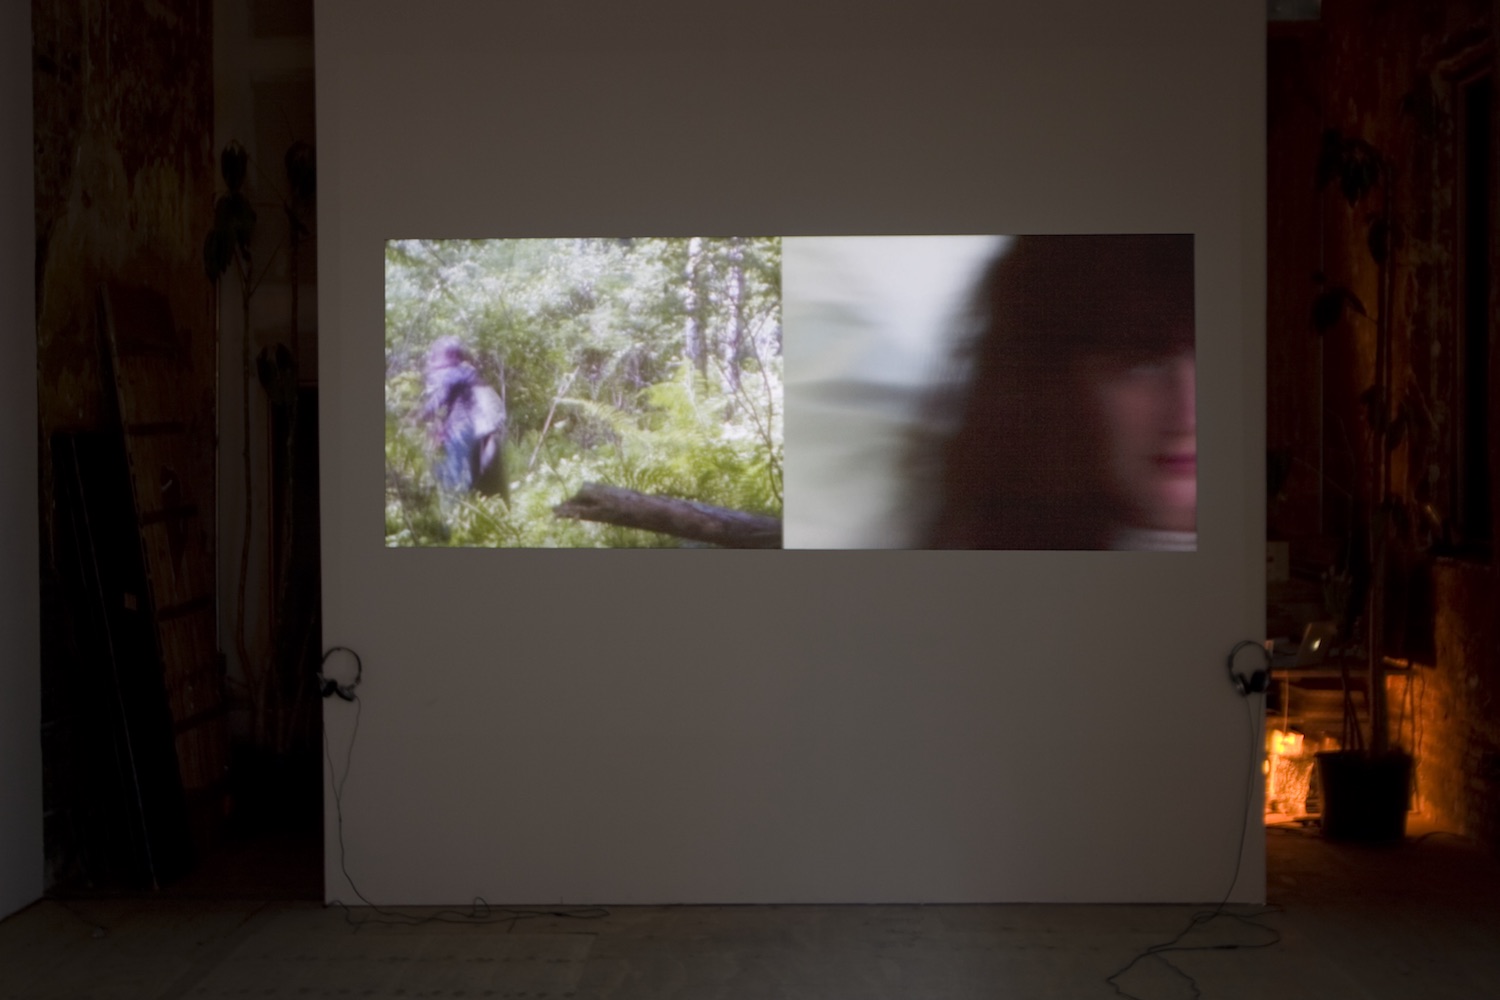 Elisabeth Subrin, *Sweet Ruin*, 2008. 16mm transferred to video, two channel video installation, 10 minutes